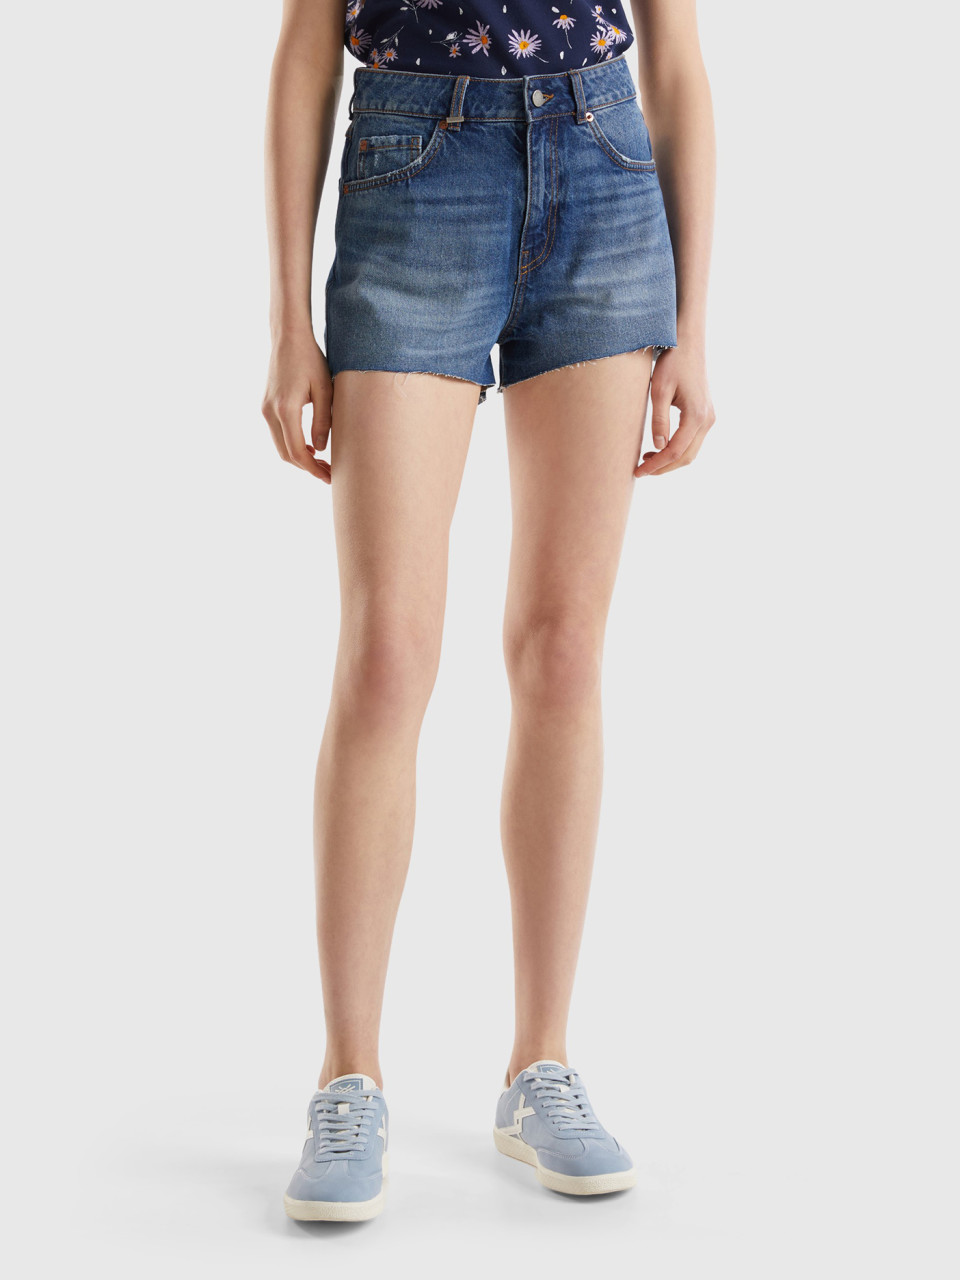 Benetton, Frayed Shorts In Recycled Cotton Blend, Blue, Women